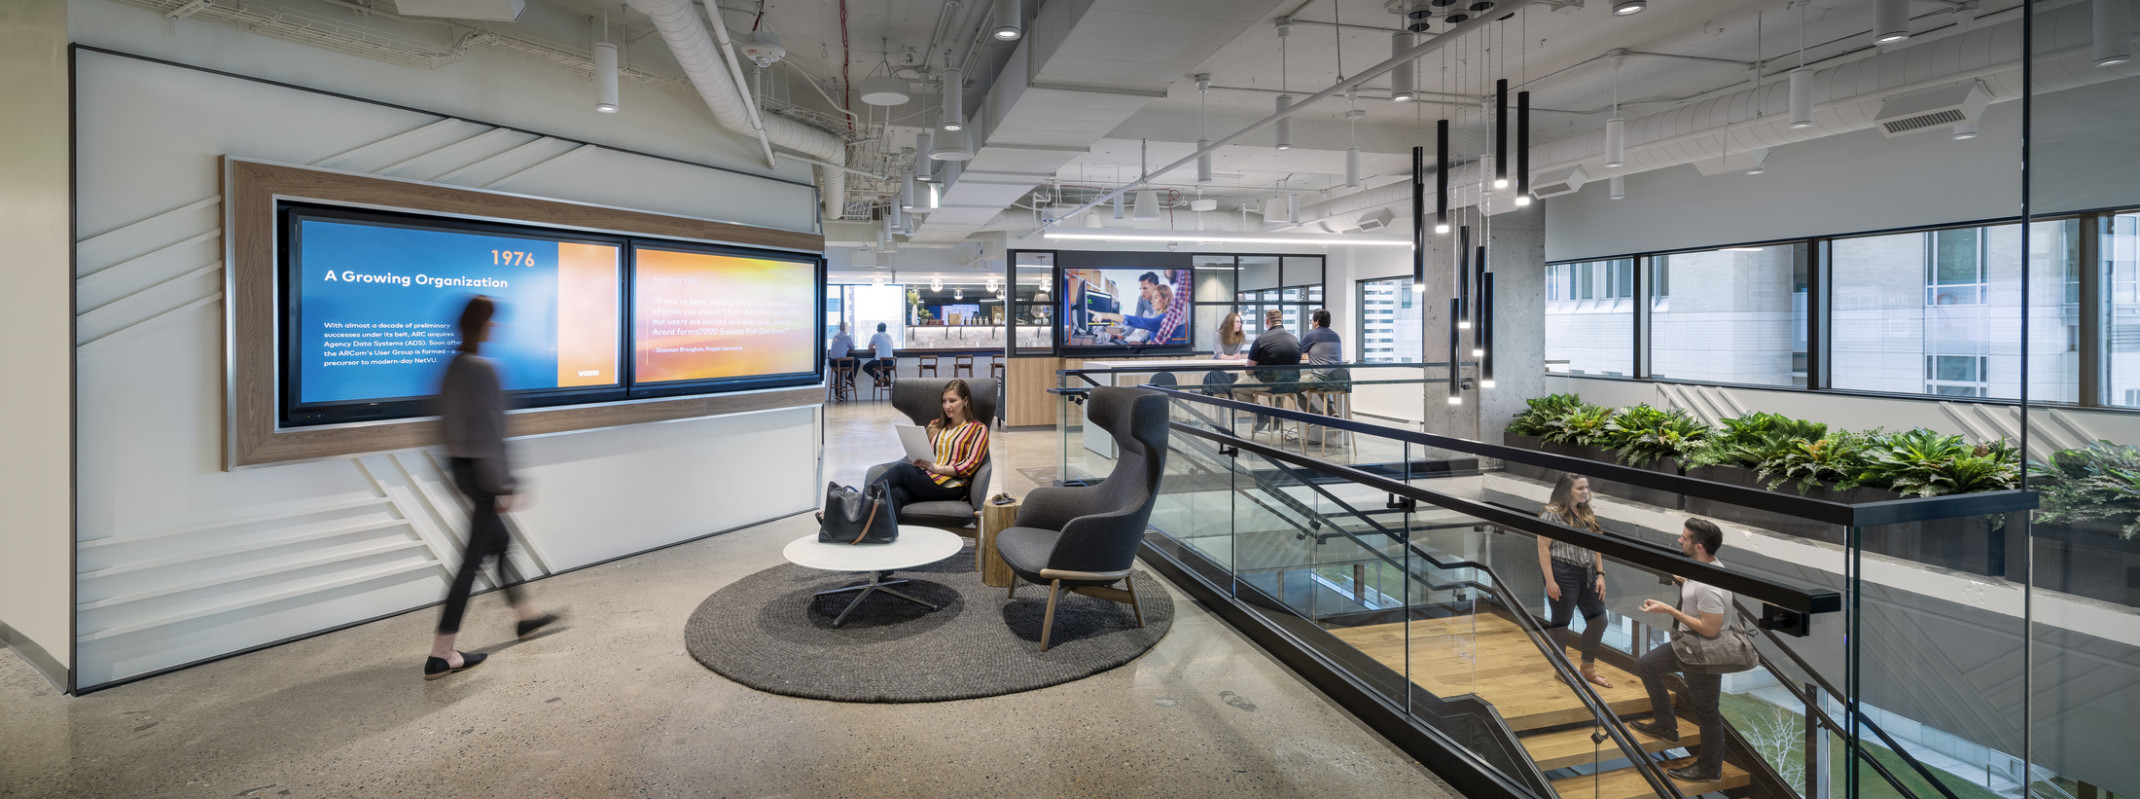 Vista Portfolio Company building interior. Seating areas in front of multiple screens across upper level at the top of stairs